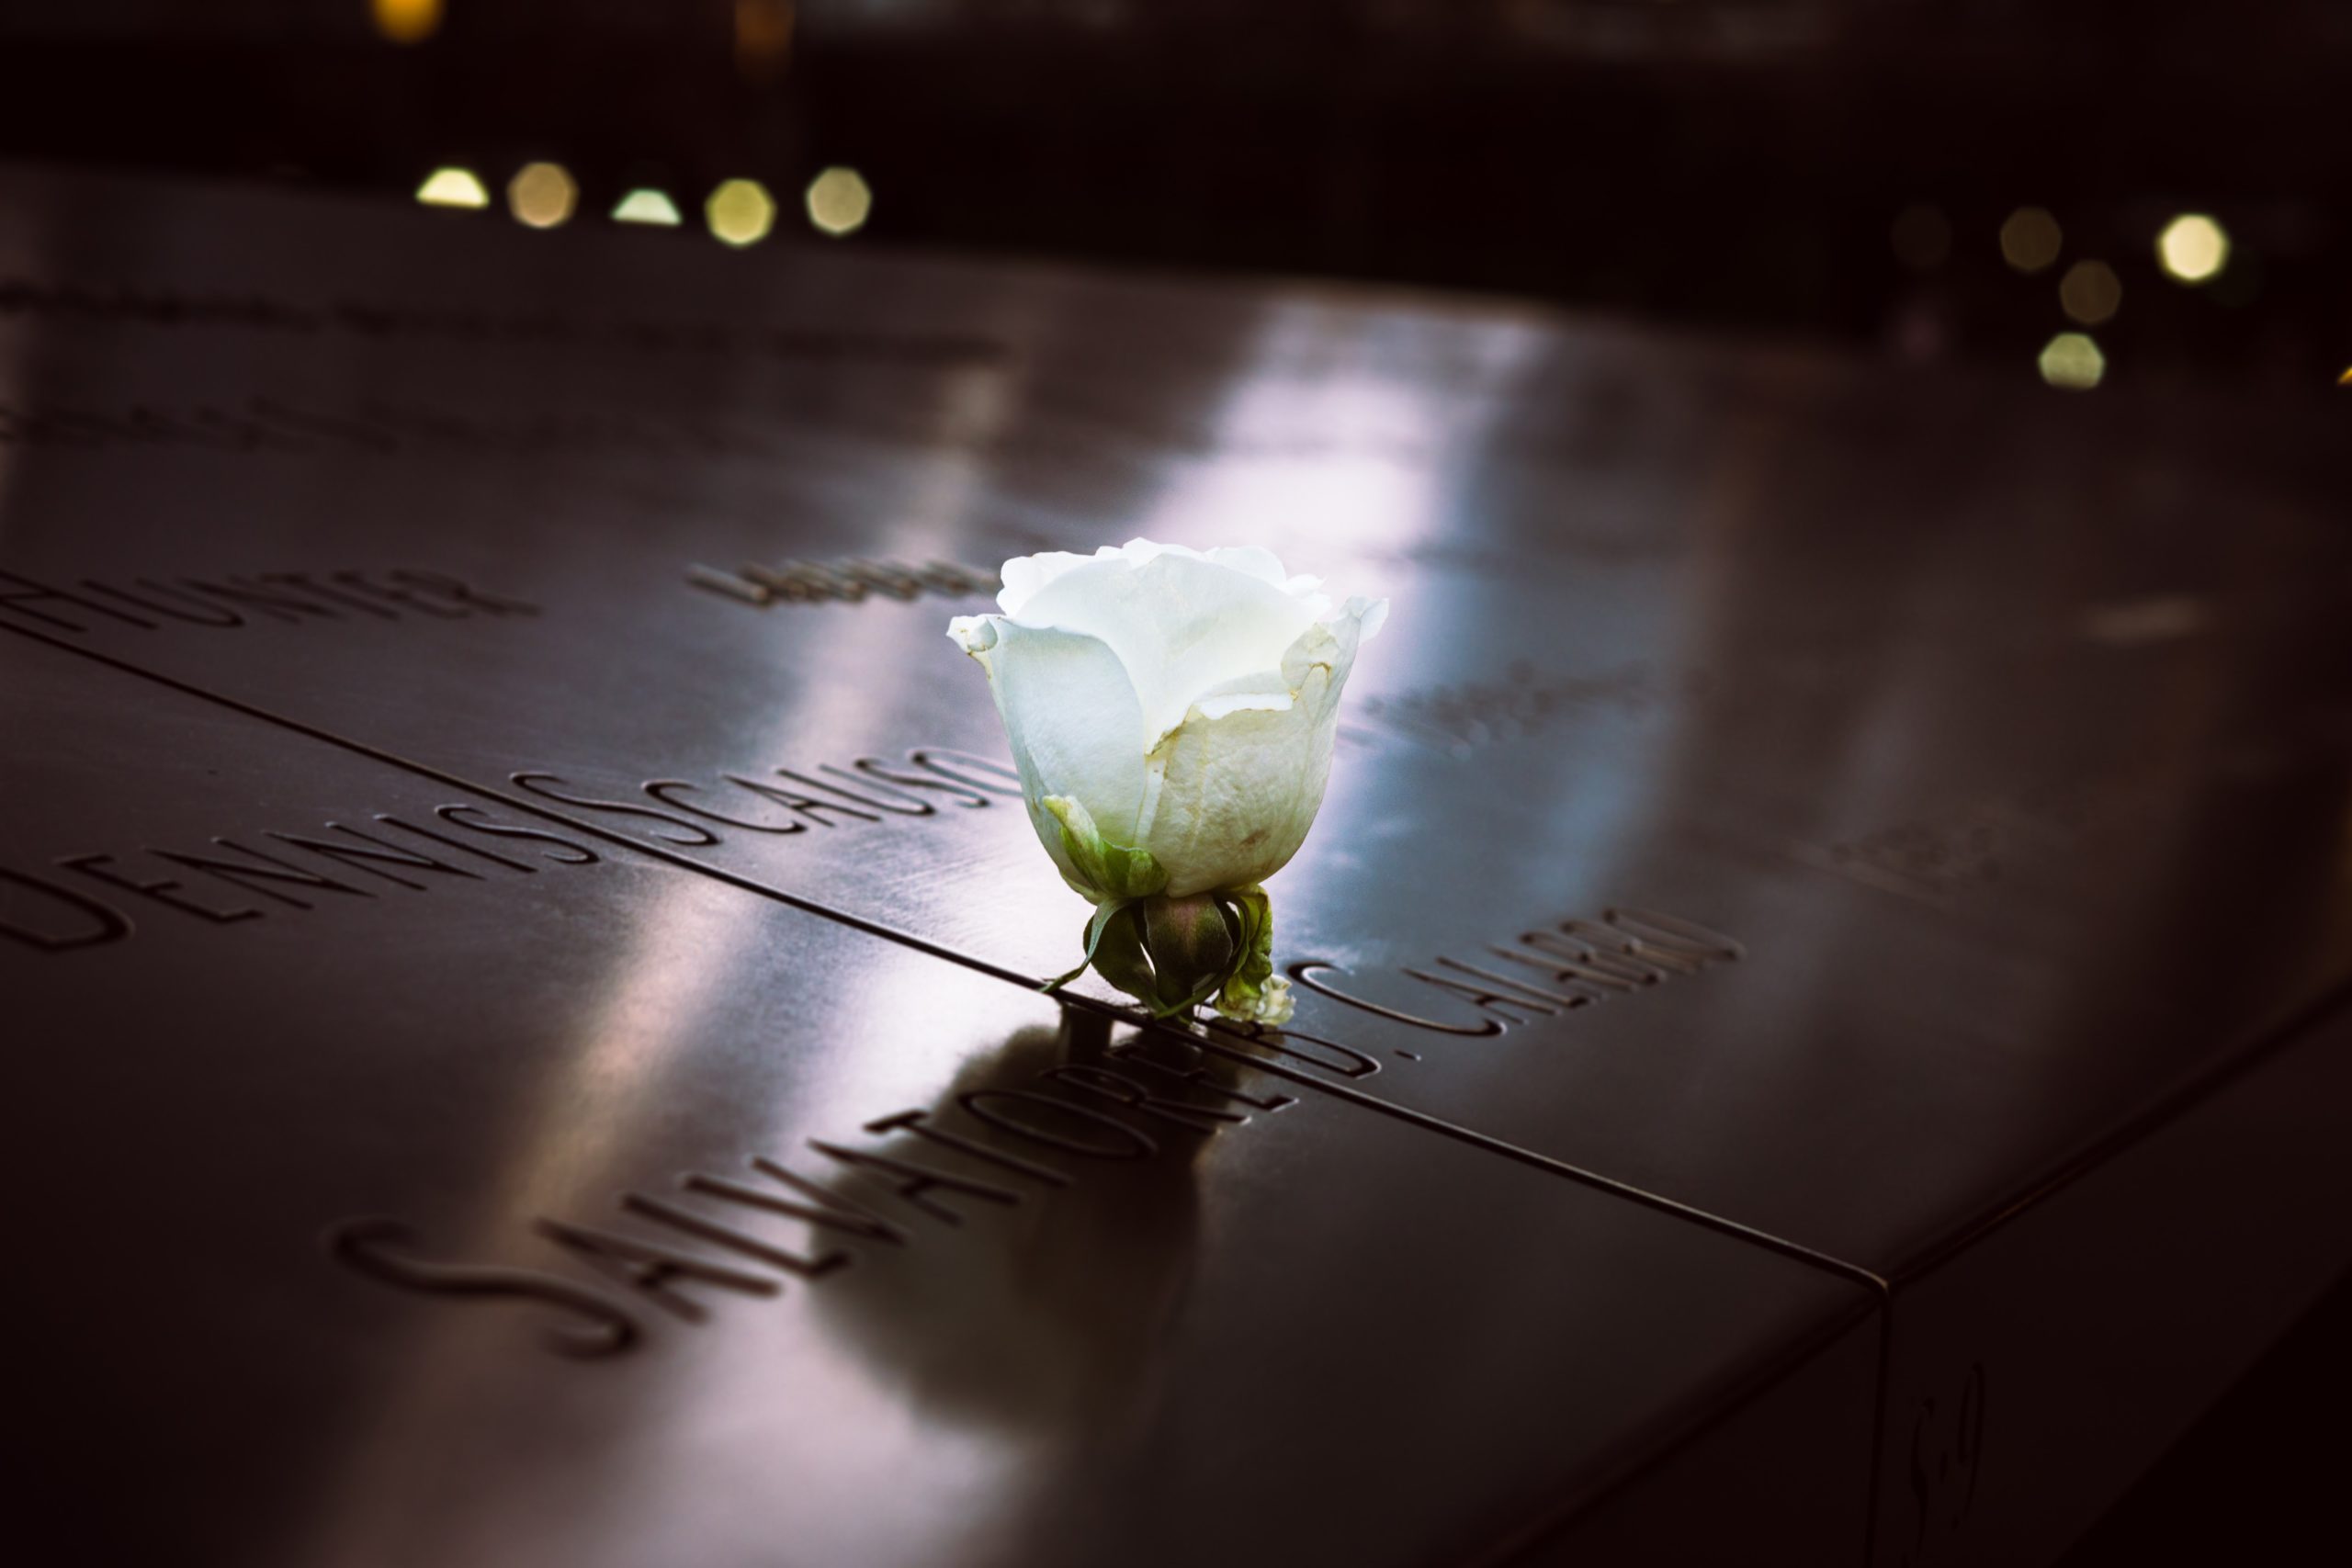 9/11 memorials and covid-19: How is America commemorating this year?